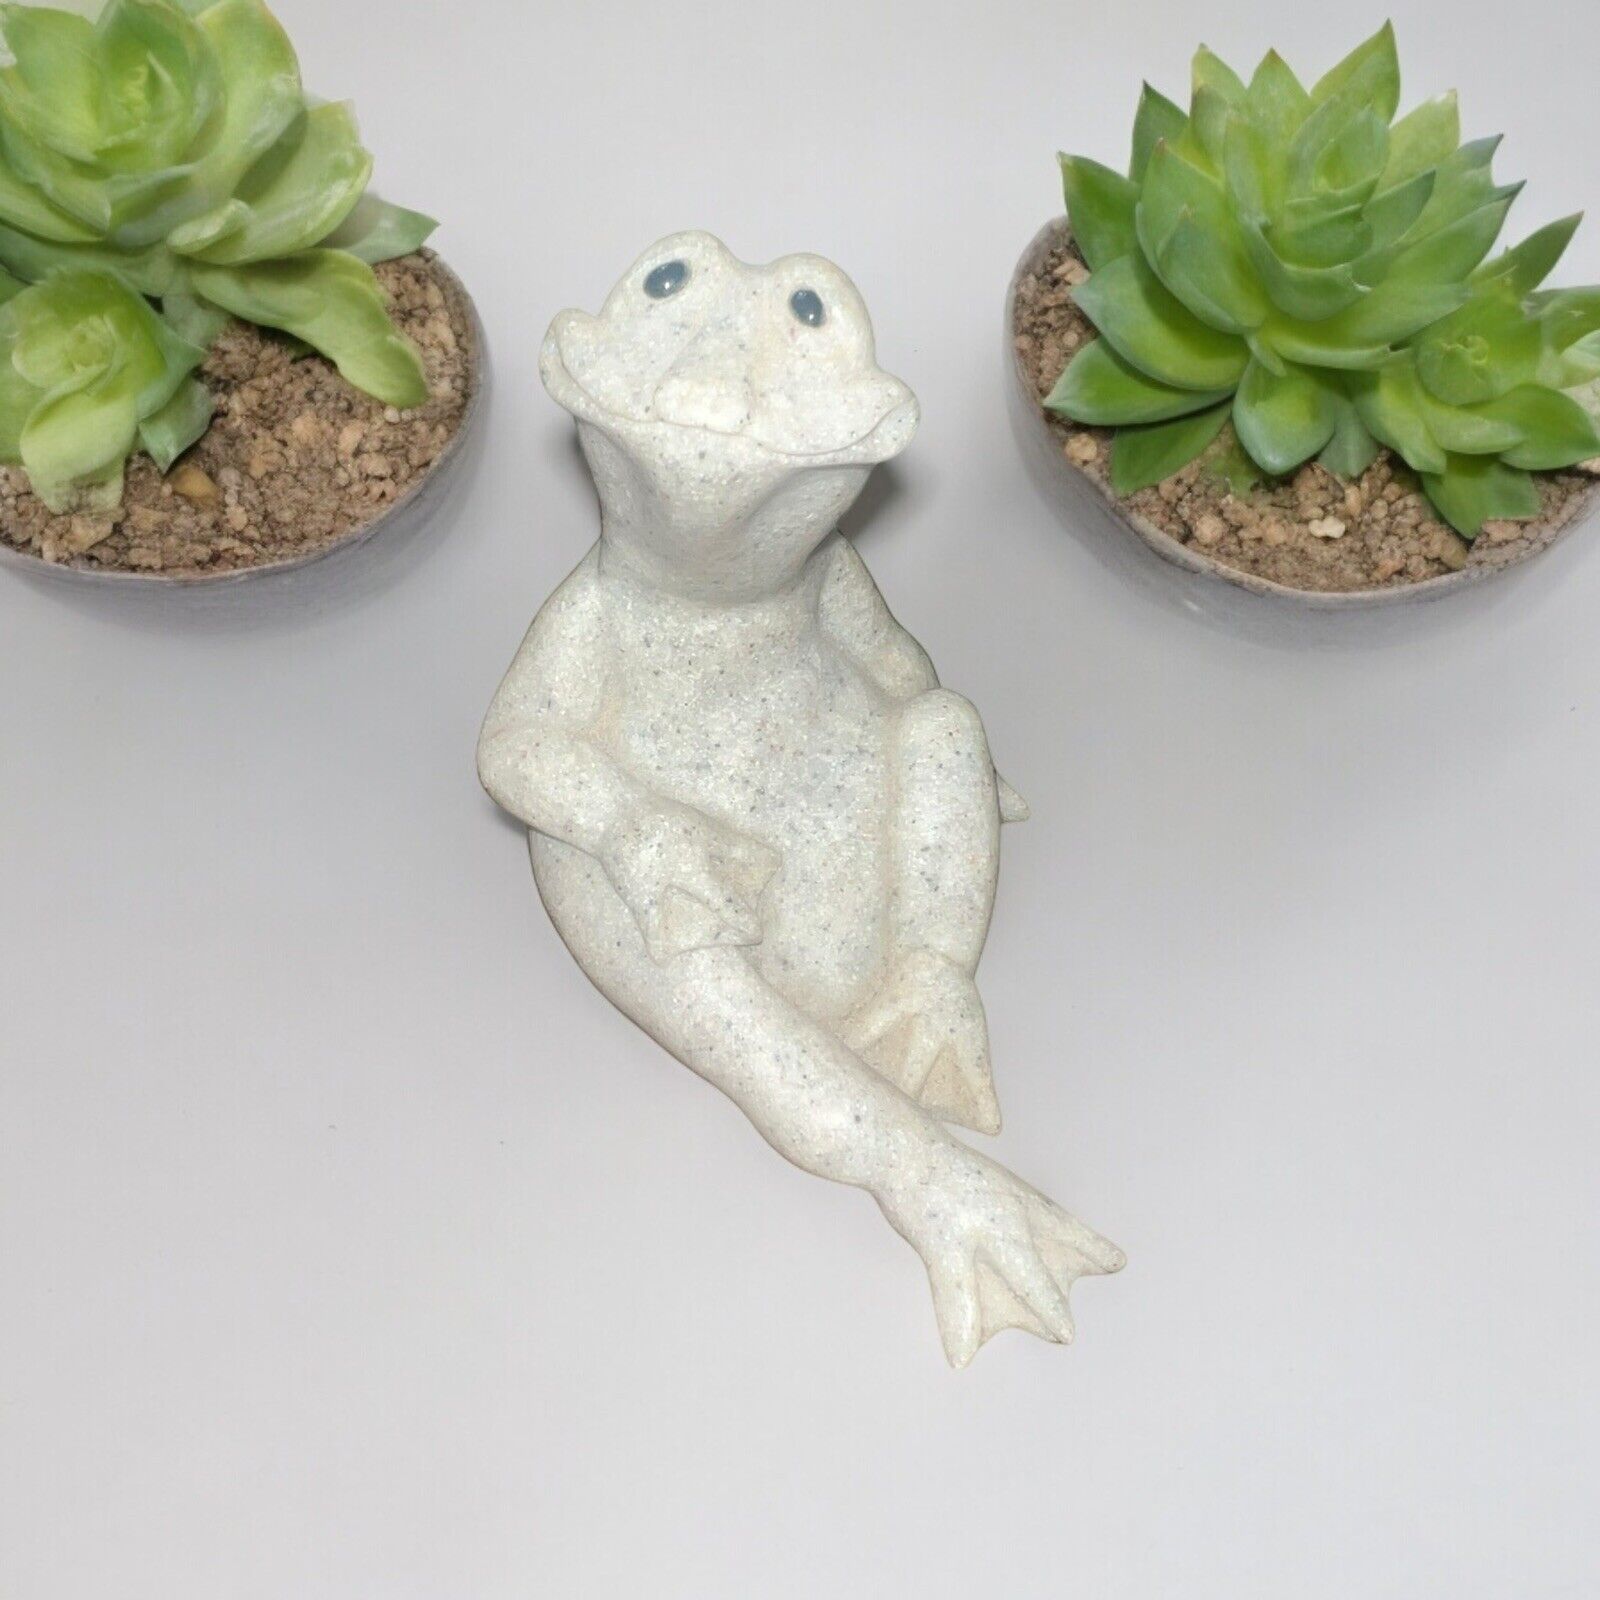 Quarry Critters Freddie The Frog Second Nature Design Figurine